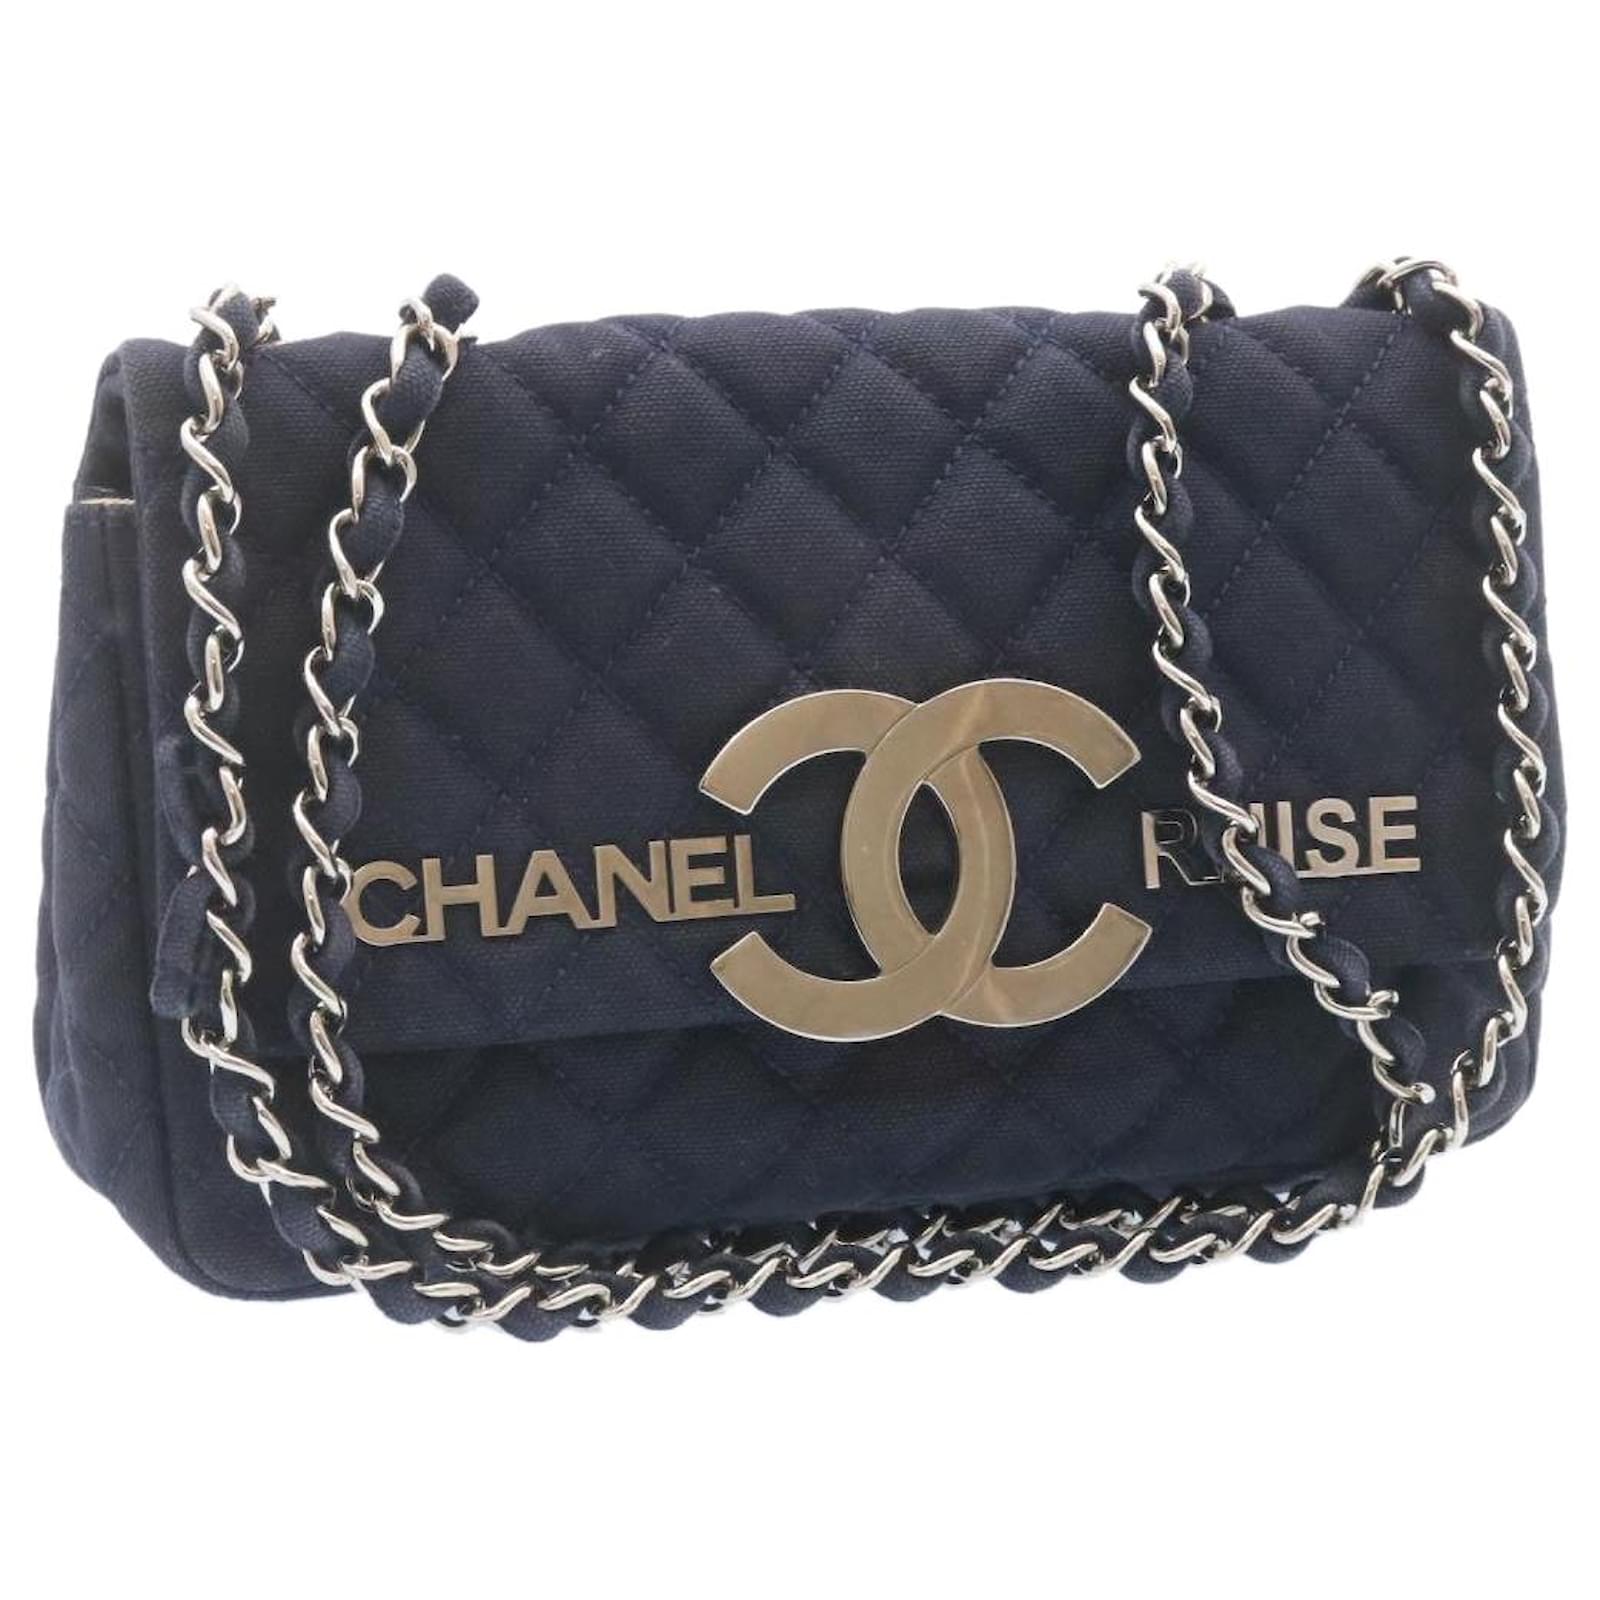 CHANEL 2022 CRUISE COLLECTION FIRST LOOK GET POPULAR BAG BEFORE SOLD OUT   YouTube